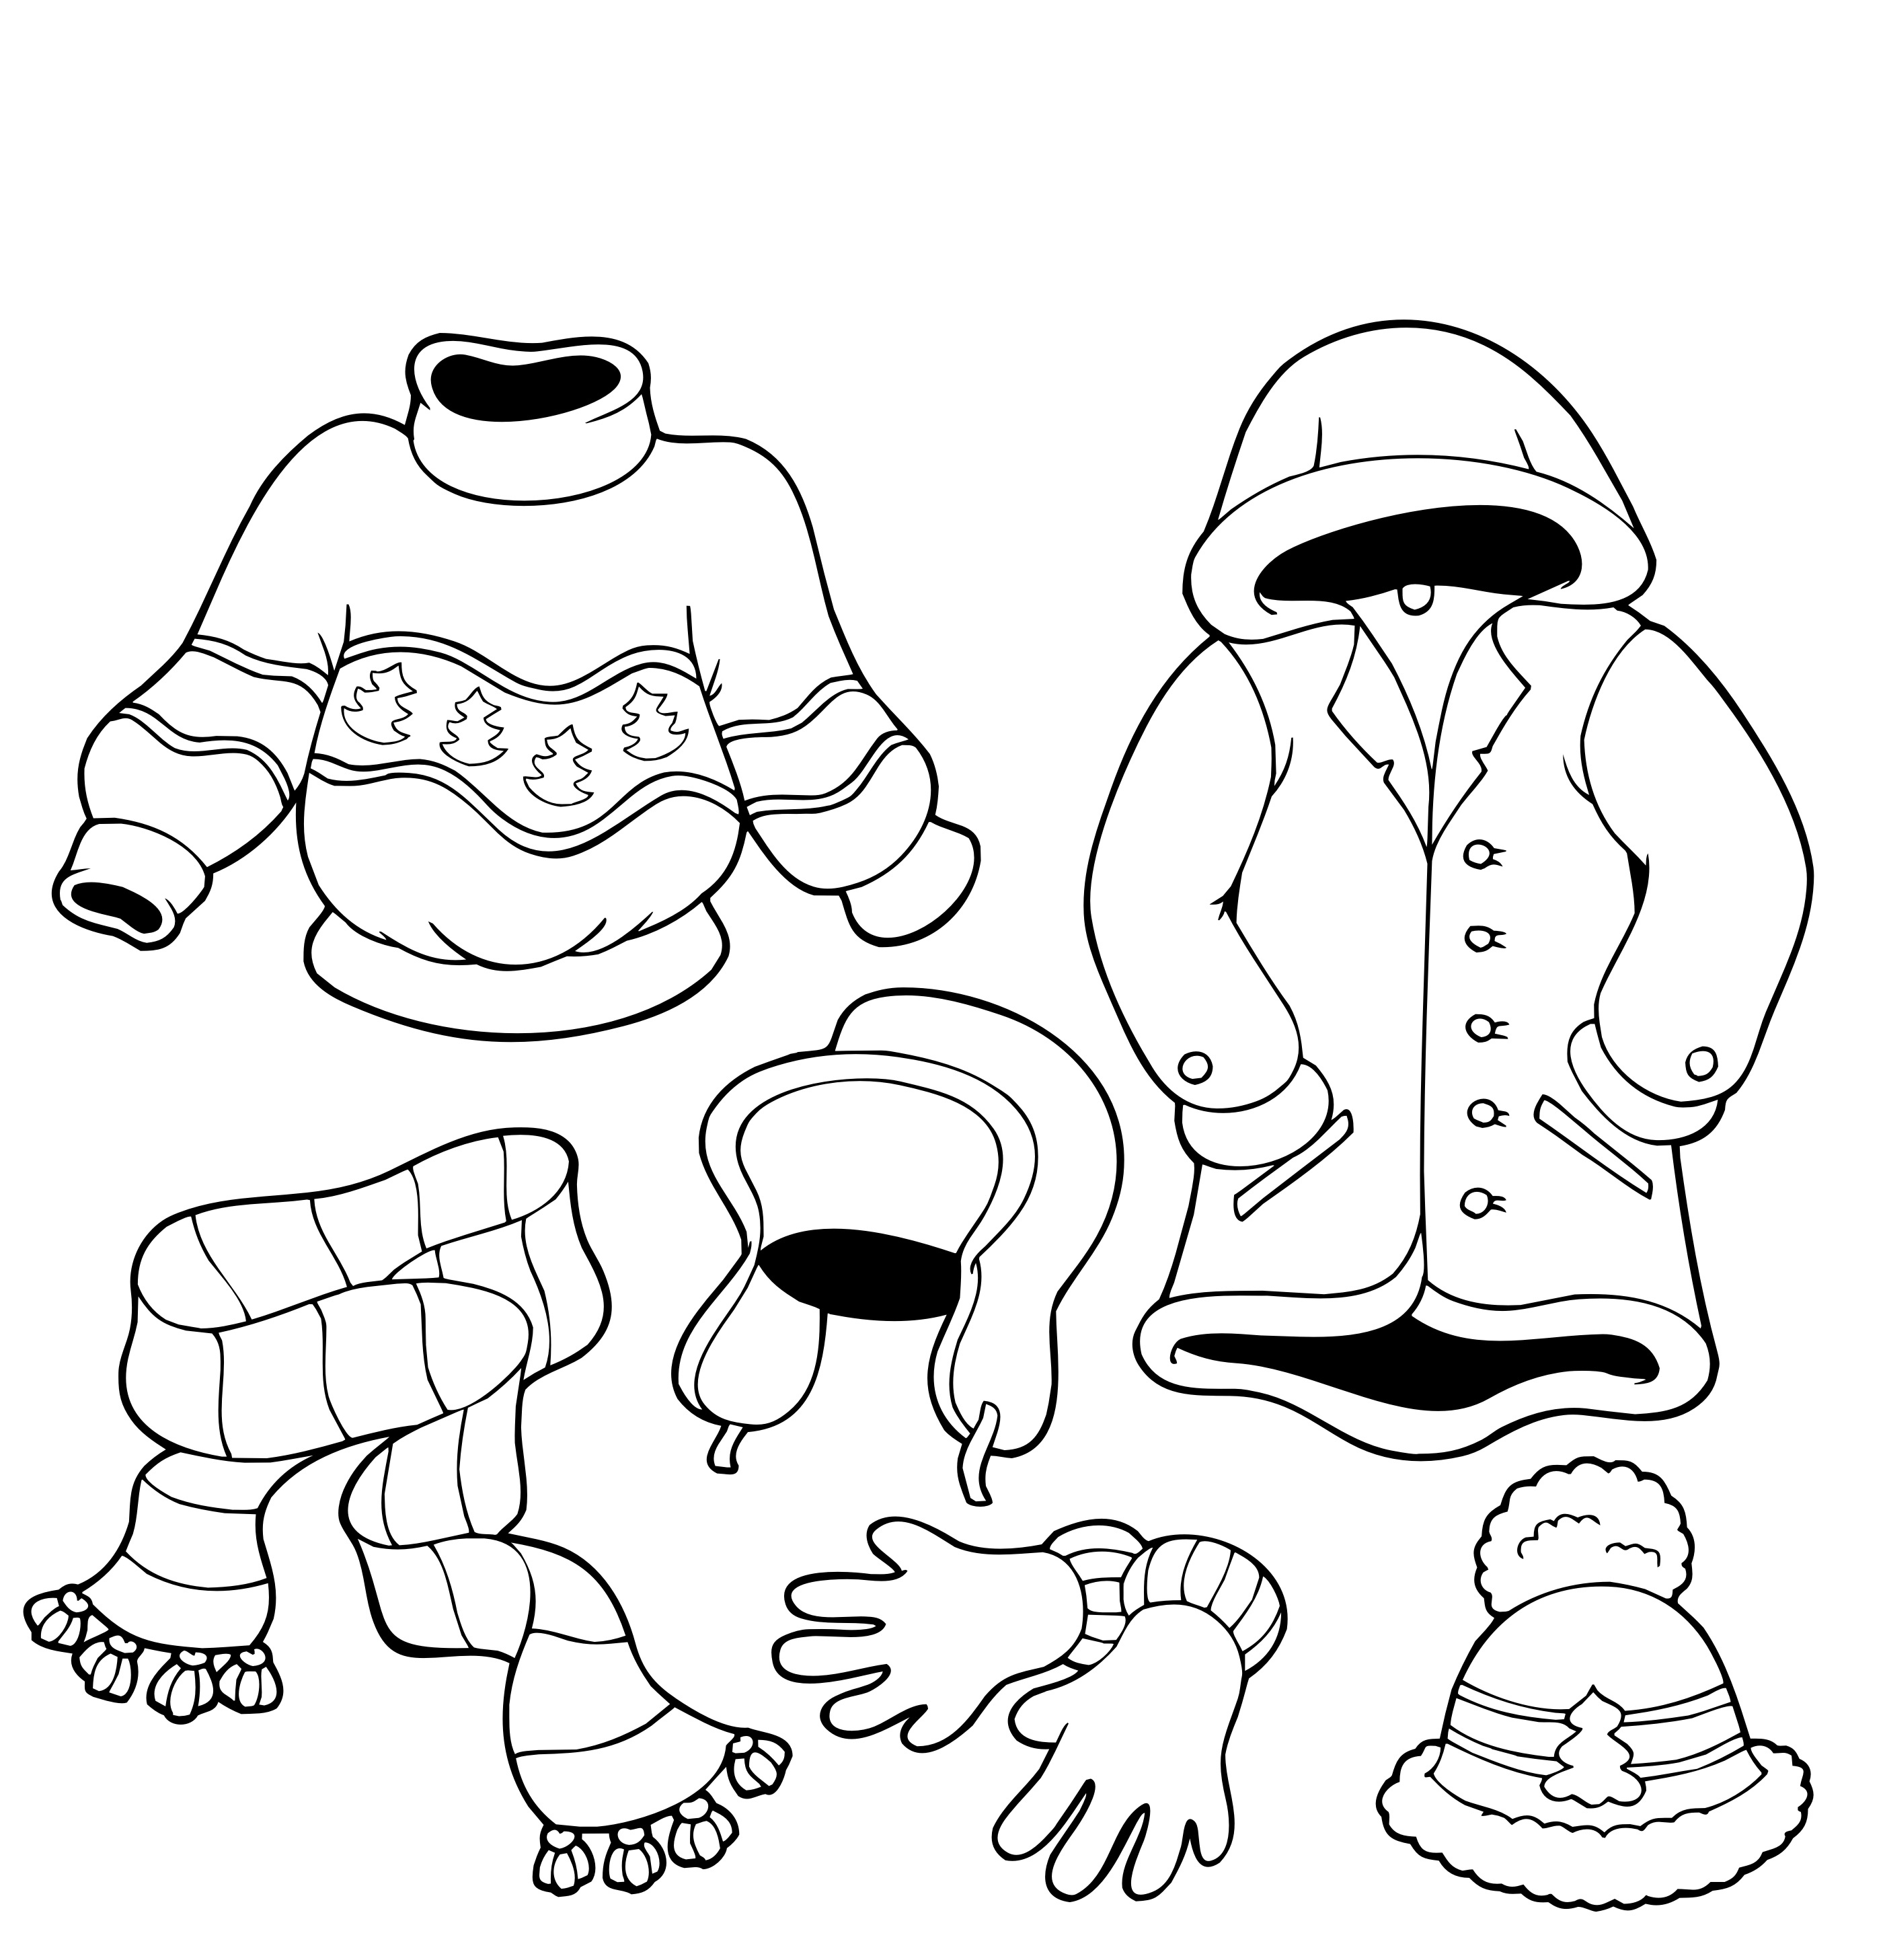  Winter Clothing Coloring Pages For Kids 4